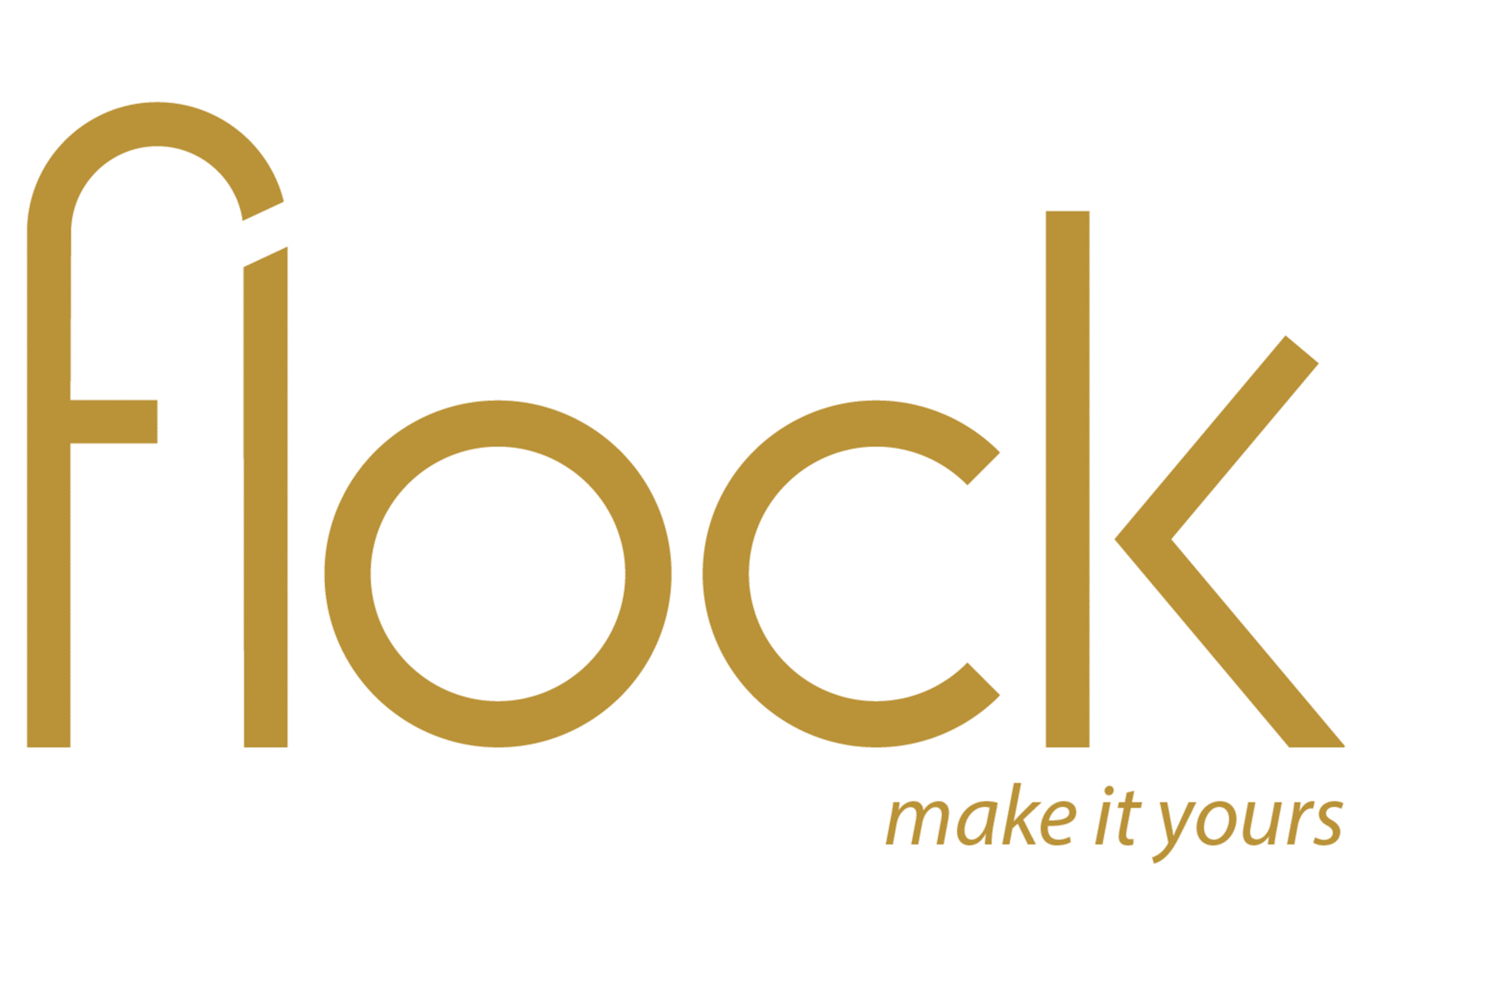 Flock Interiors | Furniture reselling & redesign Vancouver